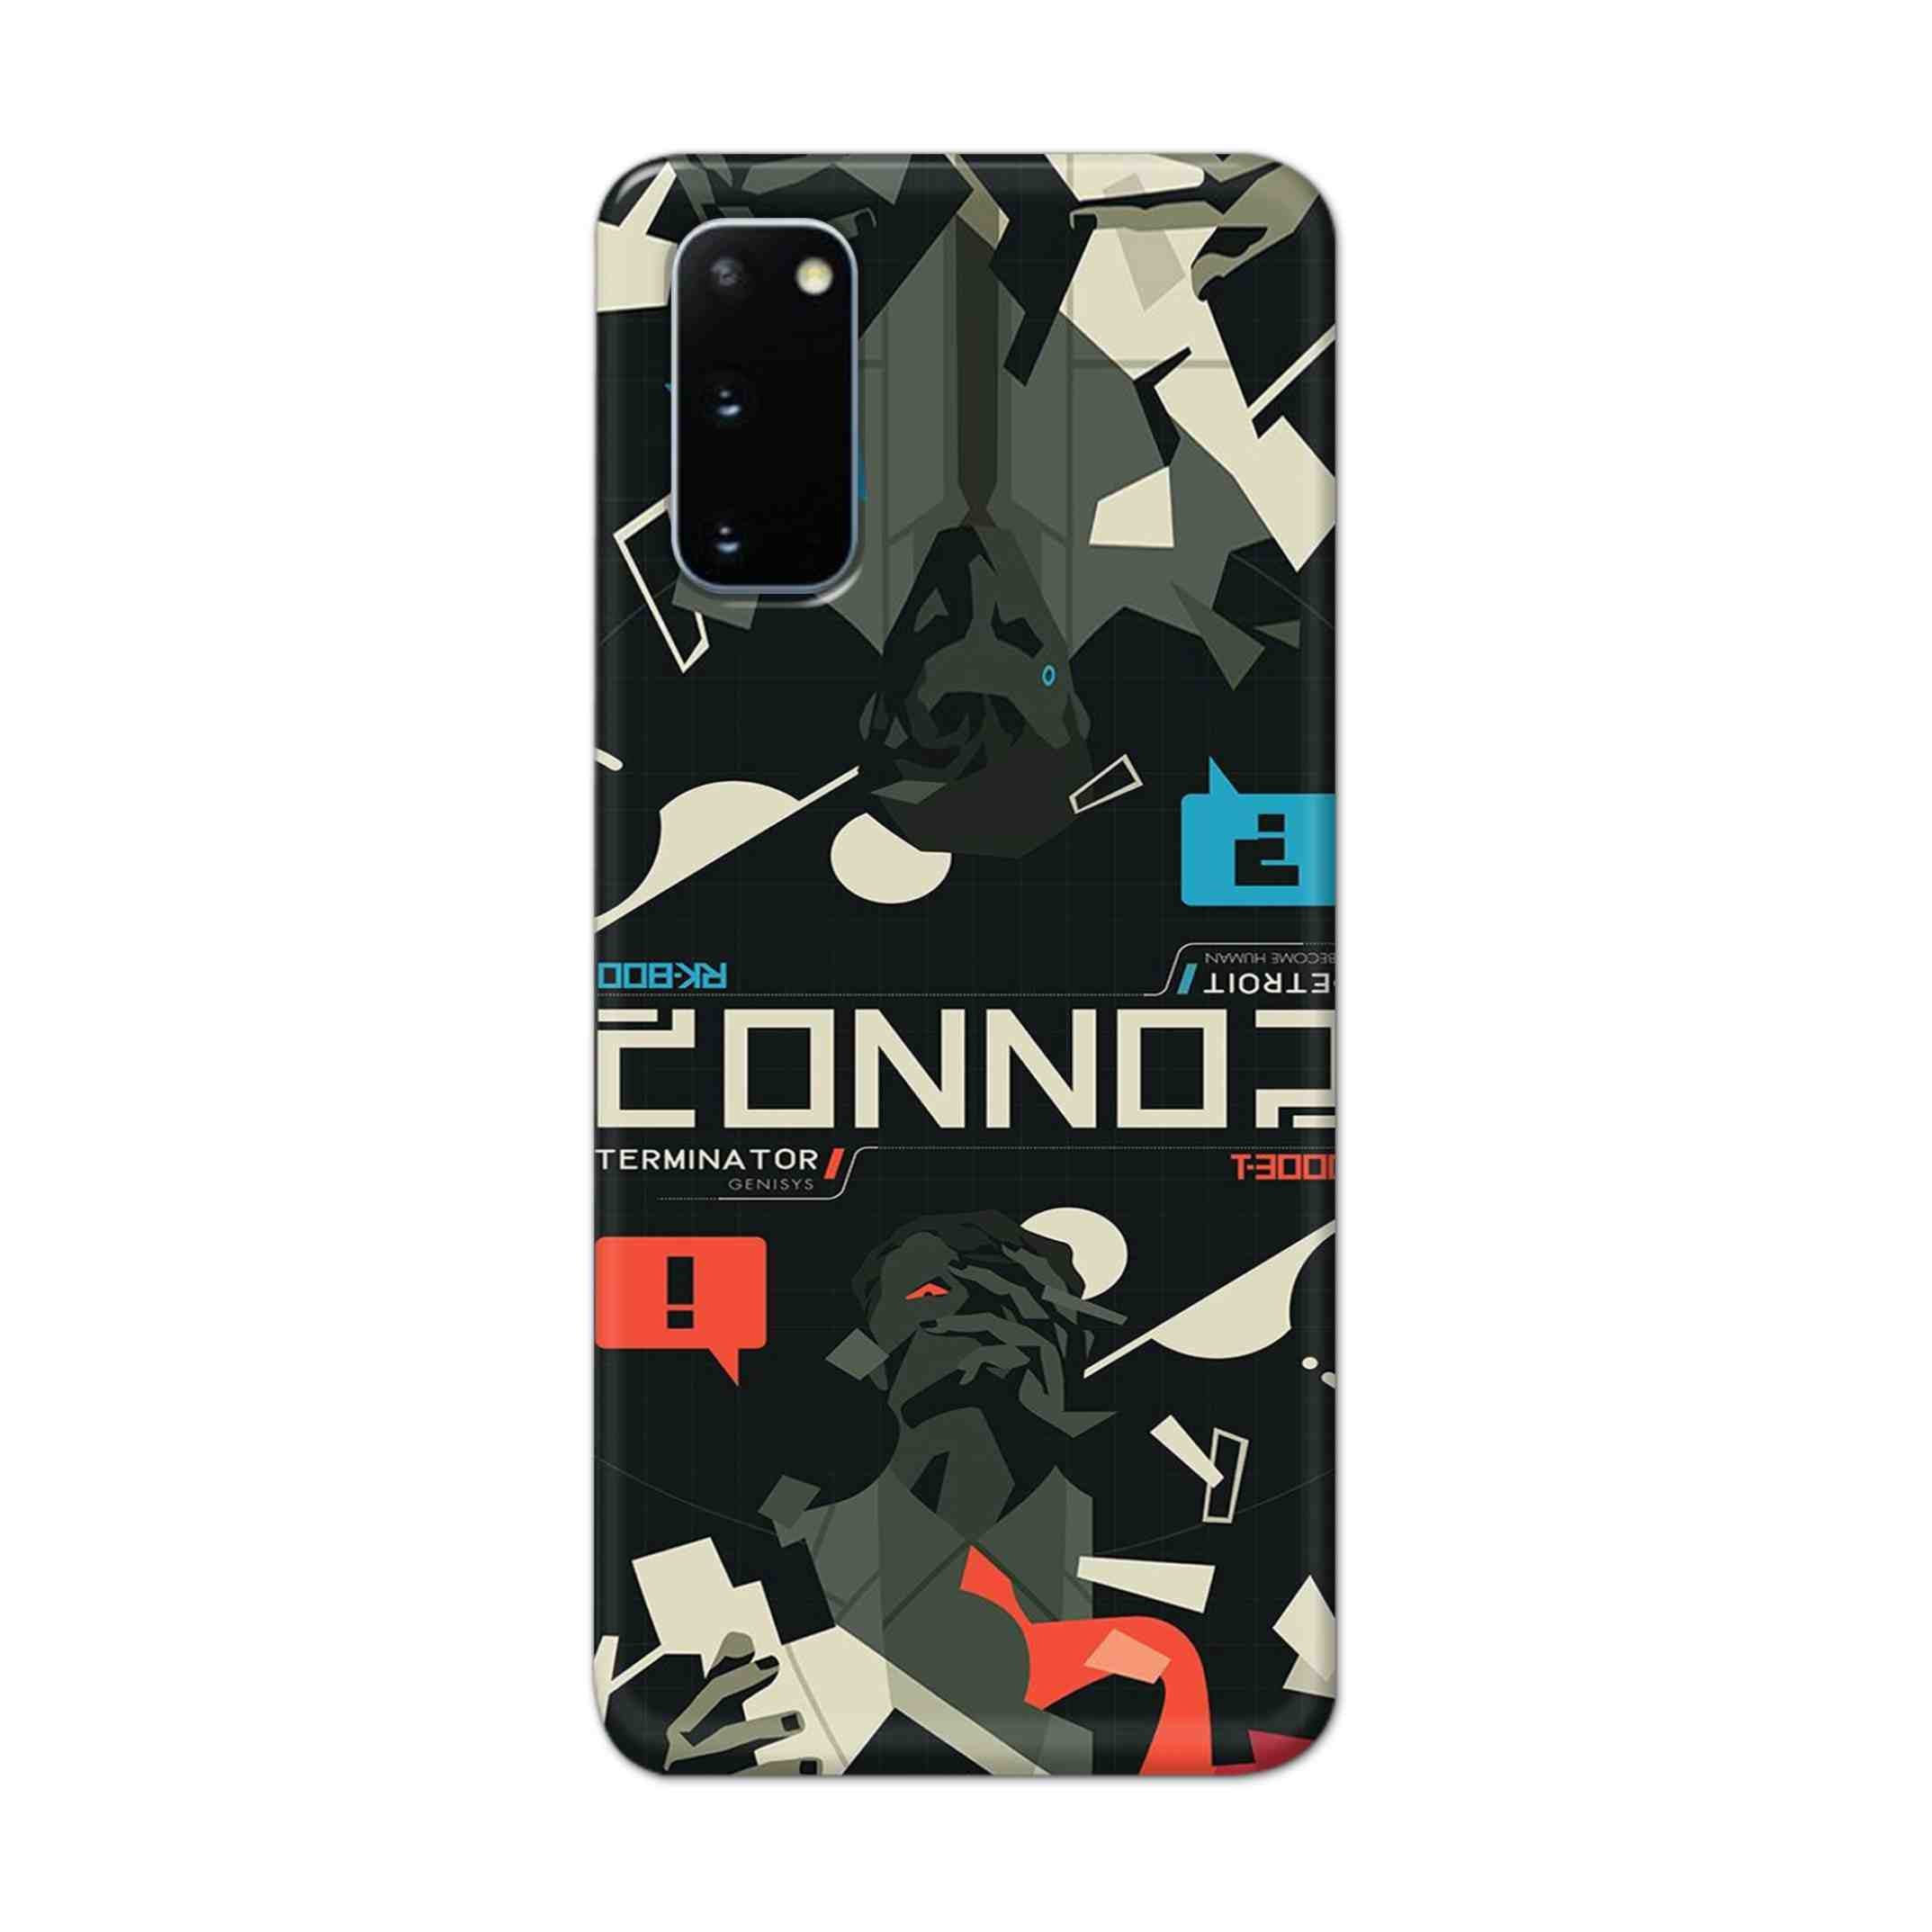 Buy Terminator Hard Back Mobile Phone Case Cover For Samsung Galaxy S20 Online